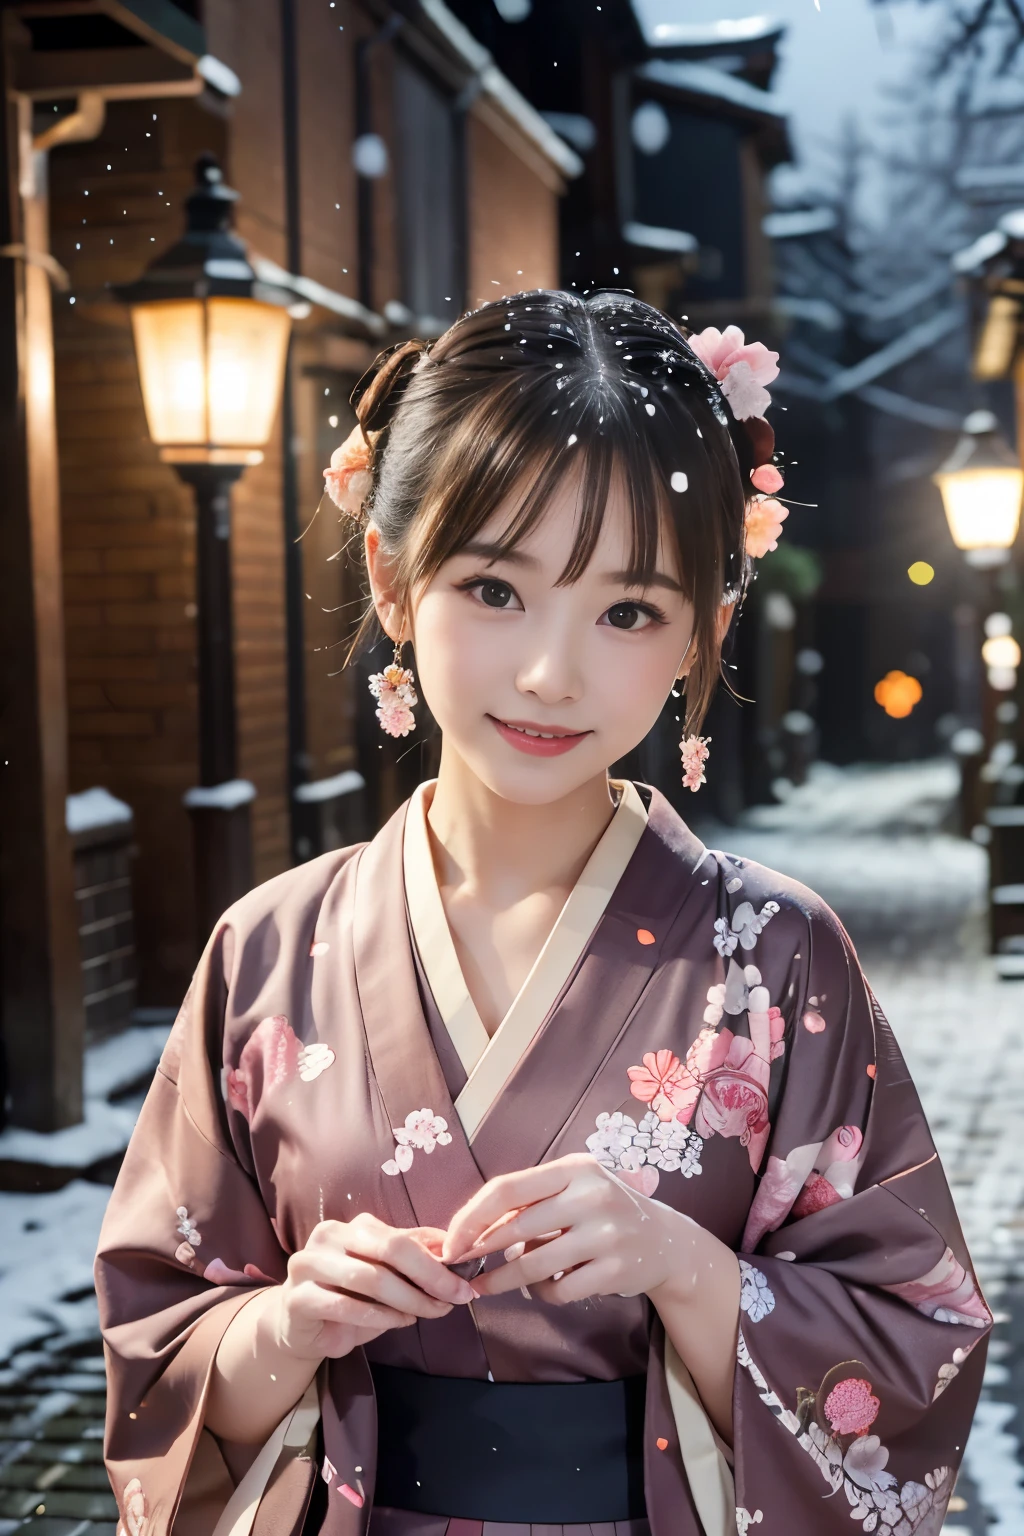 Japanese ID ,((cute ,baby face:1.2)),(8K, RAW photo, Super detailed, highest quality:1.2), (realistic, Photoreal:1.4), (very detailed, ultra high resolution ,beautiful, table top:1.2), ,very detailed顔と目,shiny skin,(Upper body:1.professional lighting,soft light, sharp focus, Depth of written boundary,medium hair,earrings, (Kimono costume with gorgeous floral pattern :1.3),( An old, cobblestone alleyway in a historic district during a gentle snowfall, illuminated by vintage street lamps:1.3)